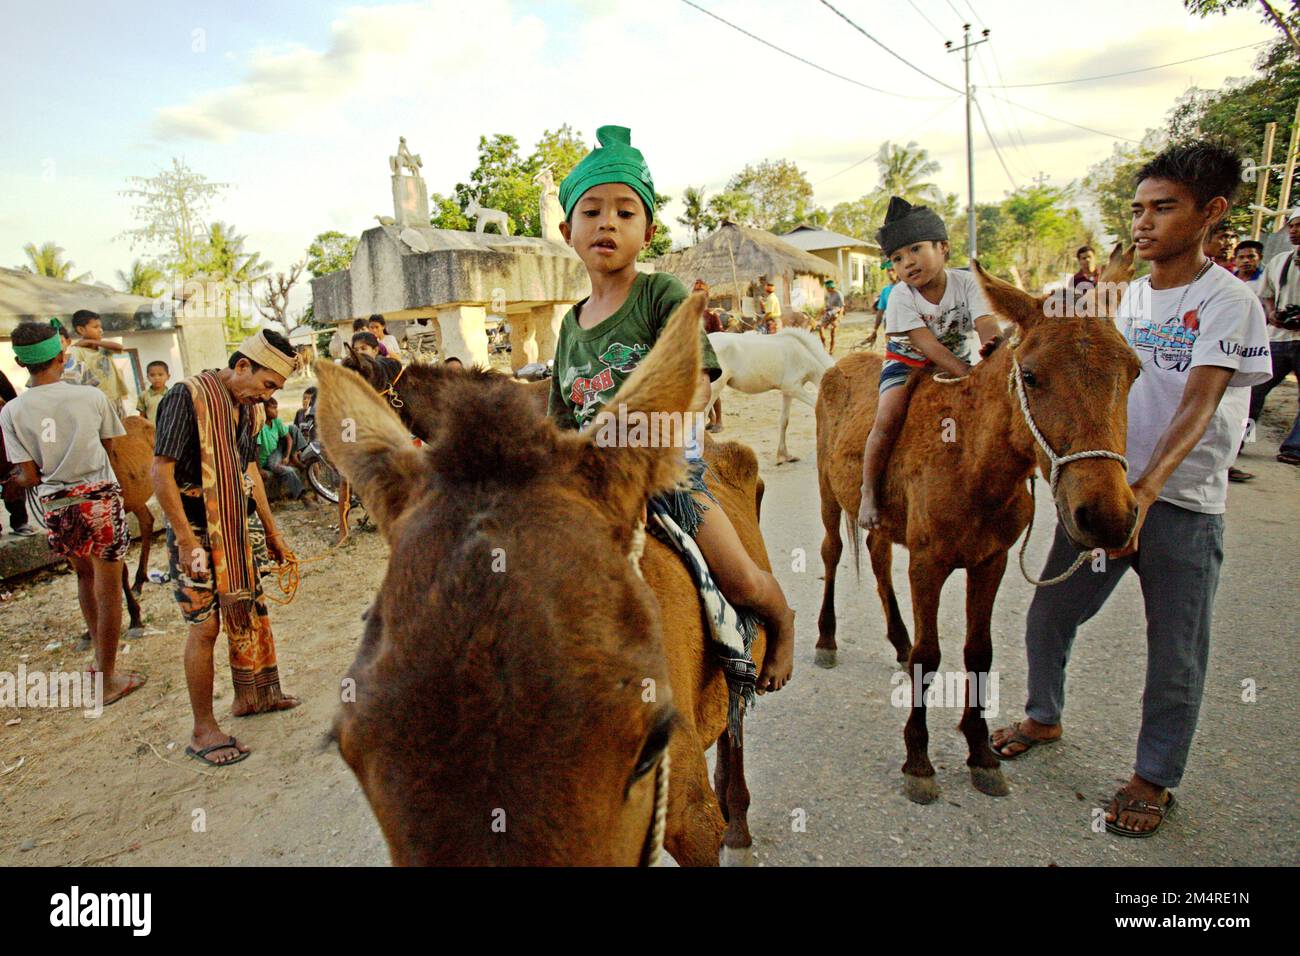 People getting ready to lead ponies as Sumbanese traditional marriage proposal gift during preparation of the marriage proposal procession of their traditional leader in Prailiu village near Waingapu City in East Sumba regency, East Nusa Tenggara province, Indonesia. Stock Photo